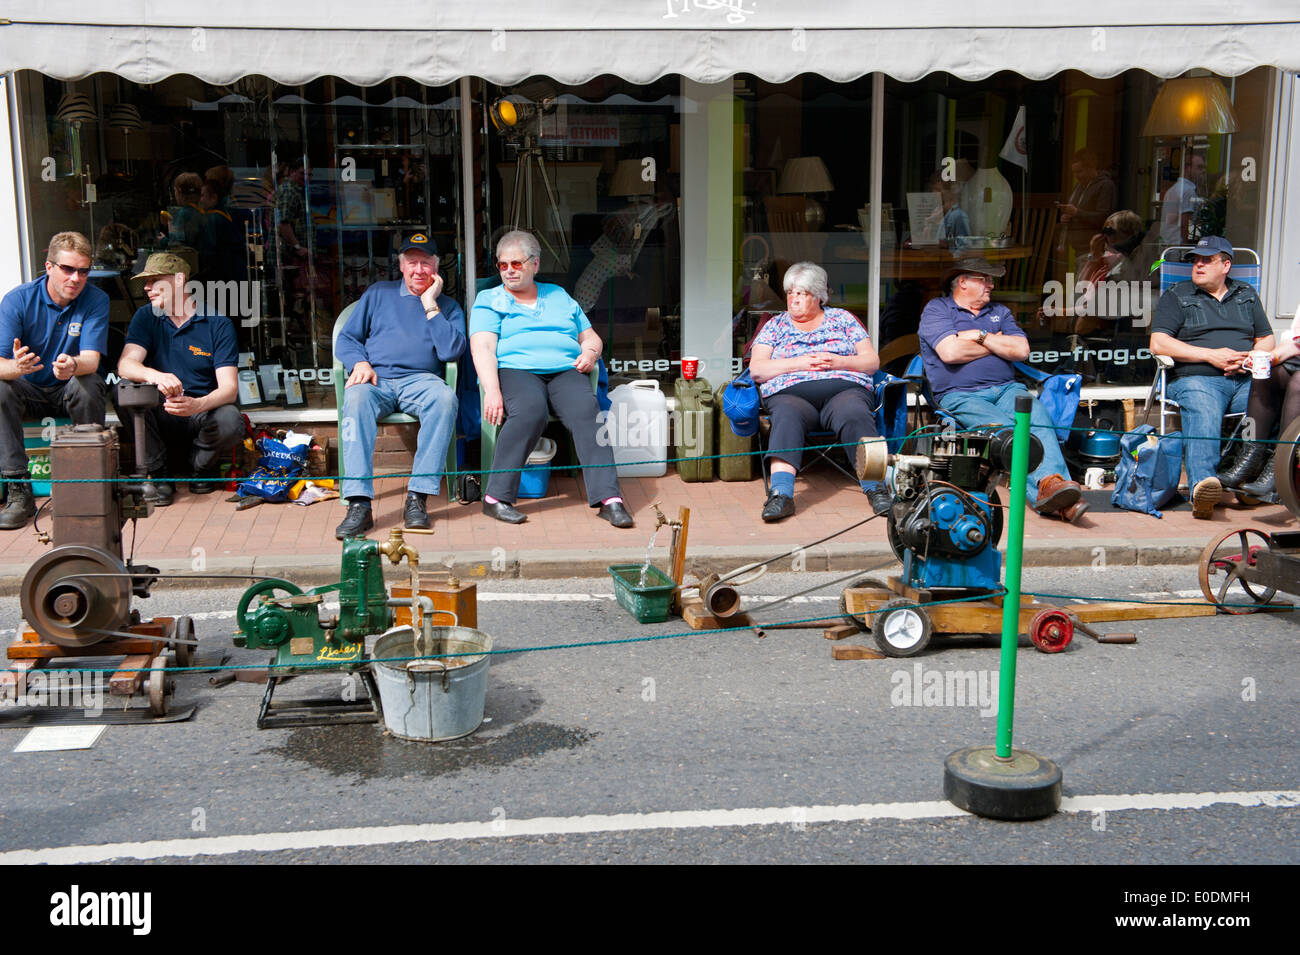 Stationary engine enthusiasts display their machines at a town fair Stock Photo